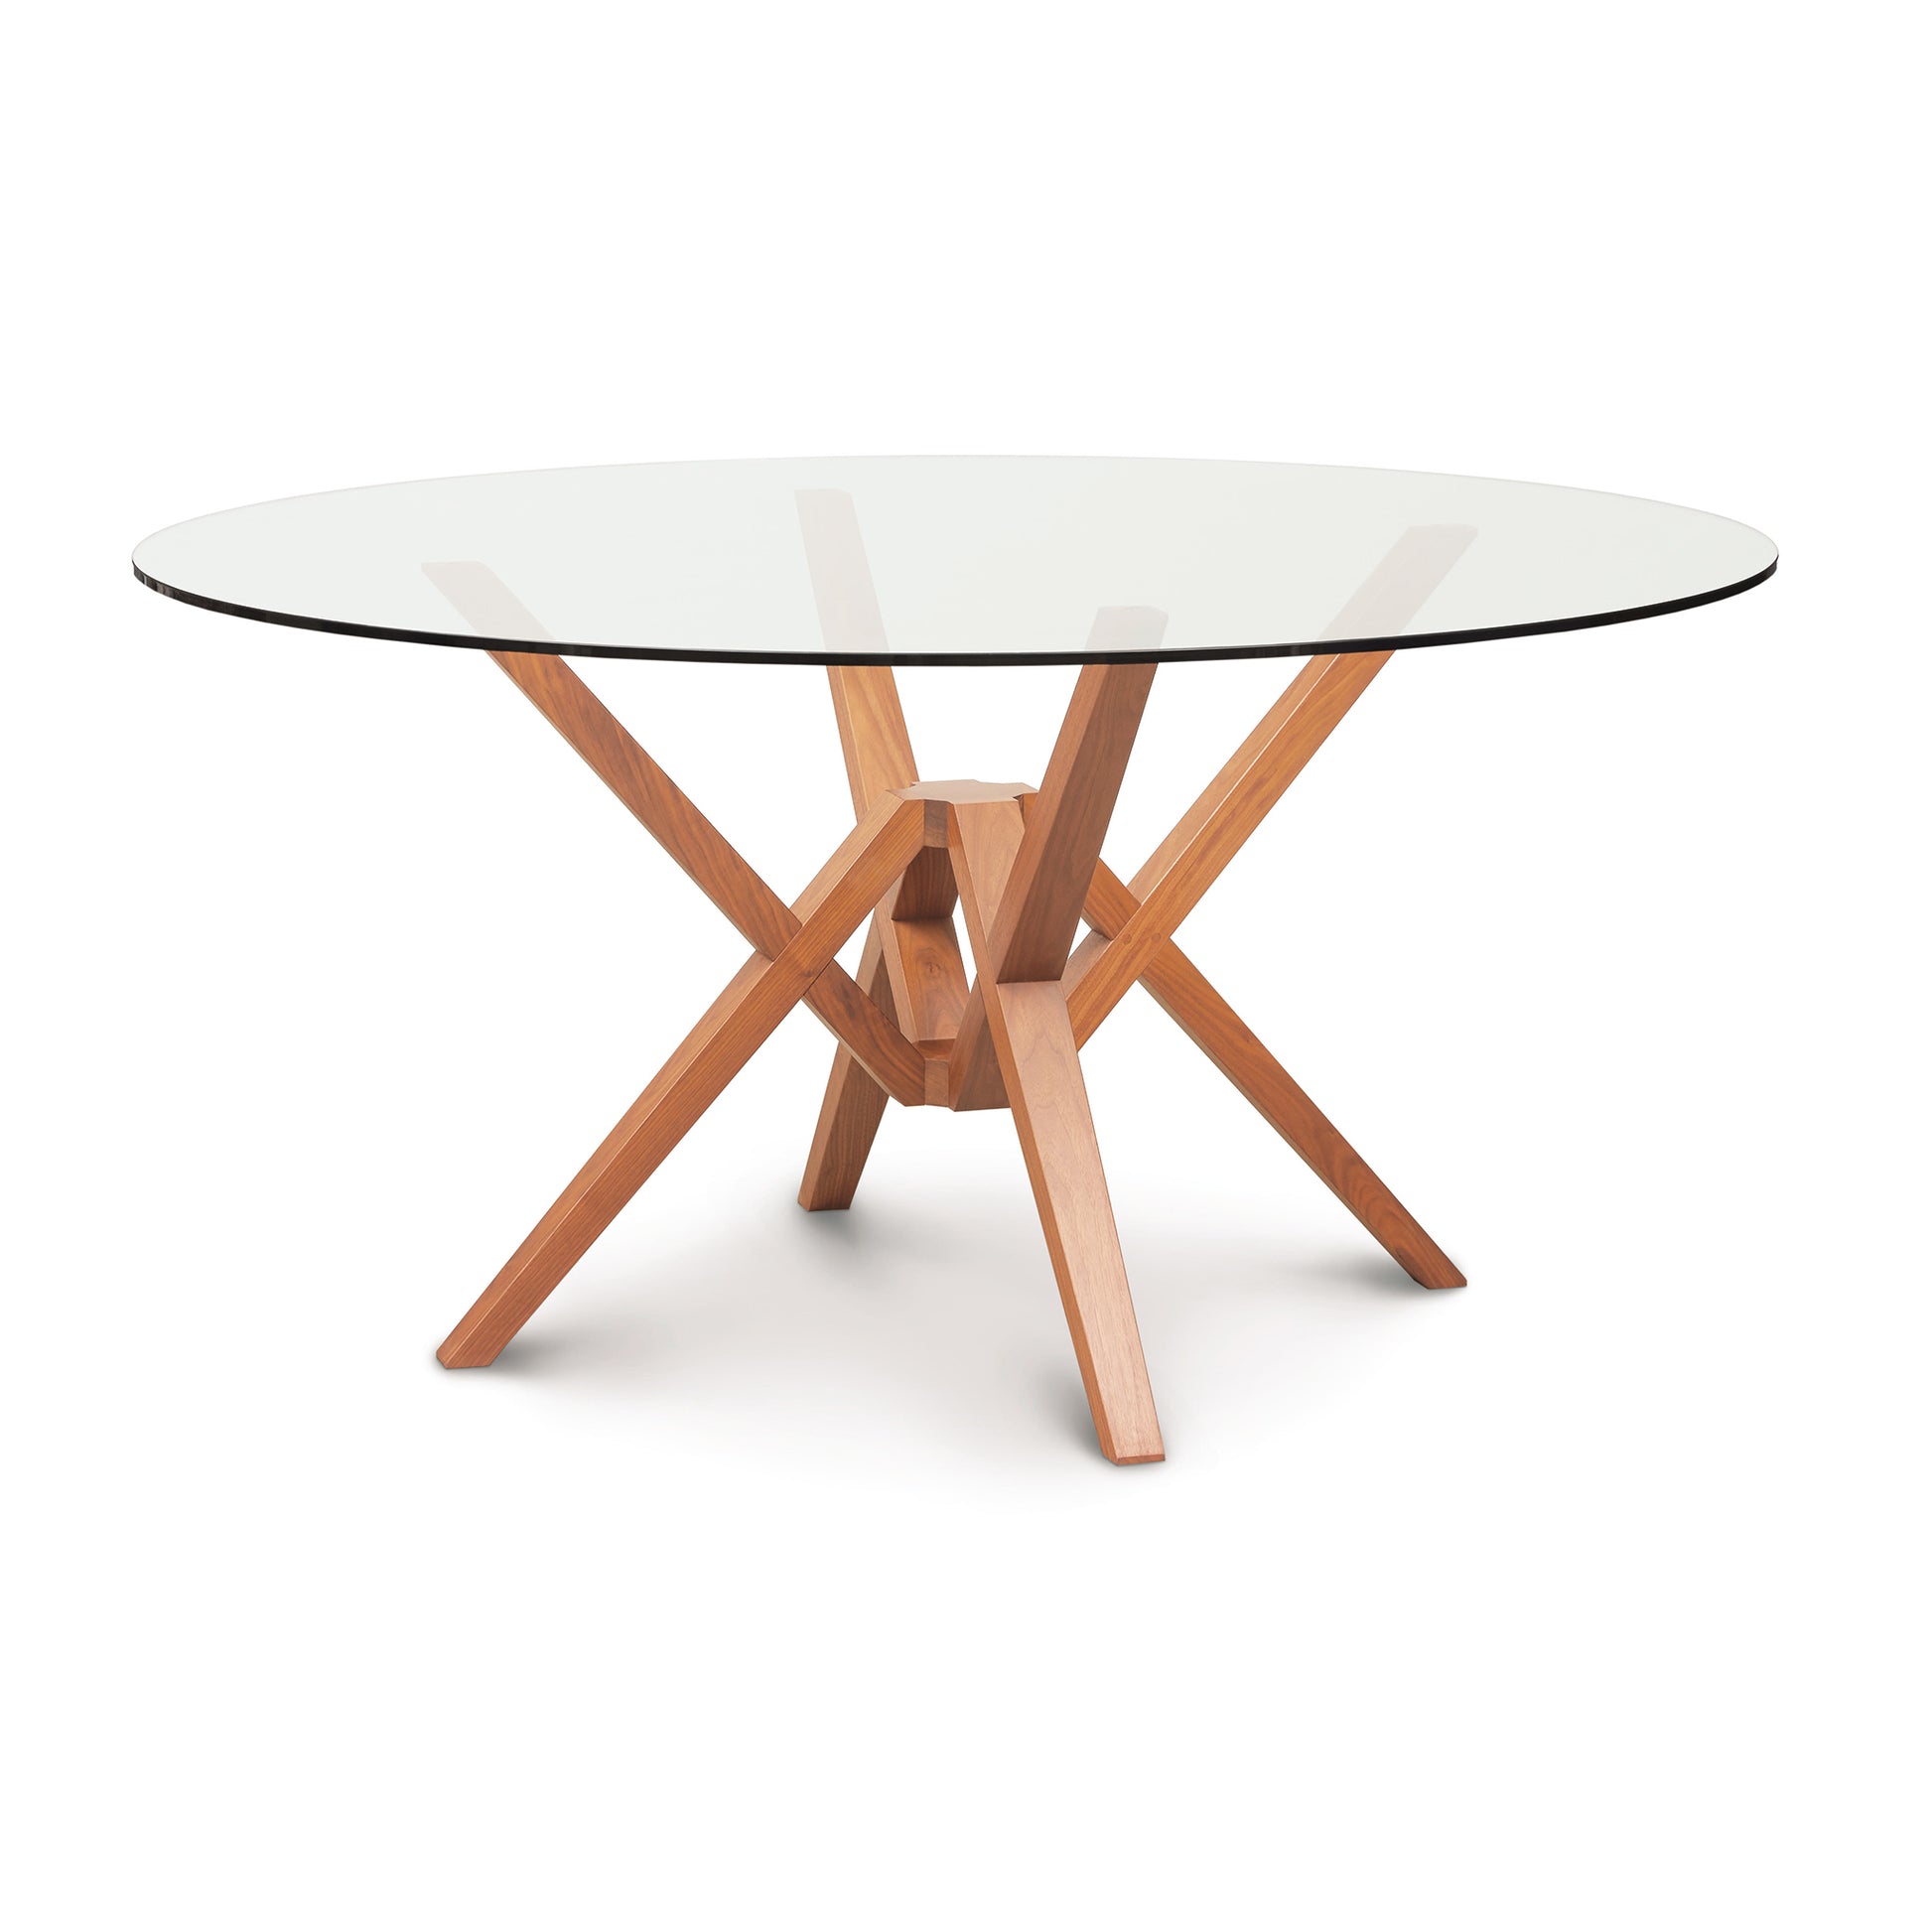 The Copeland Furniture Exeter Round Glass Top Table features innovative engineering and a unique isometric design that showcases wooden legs supporting a sleek, yet sturdy glass top.